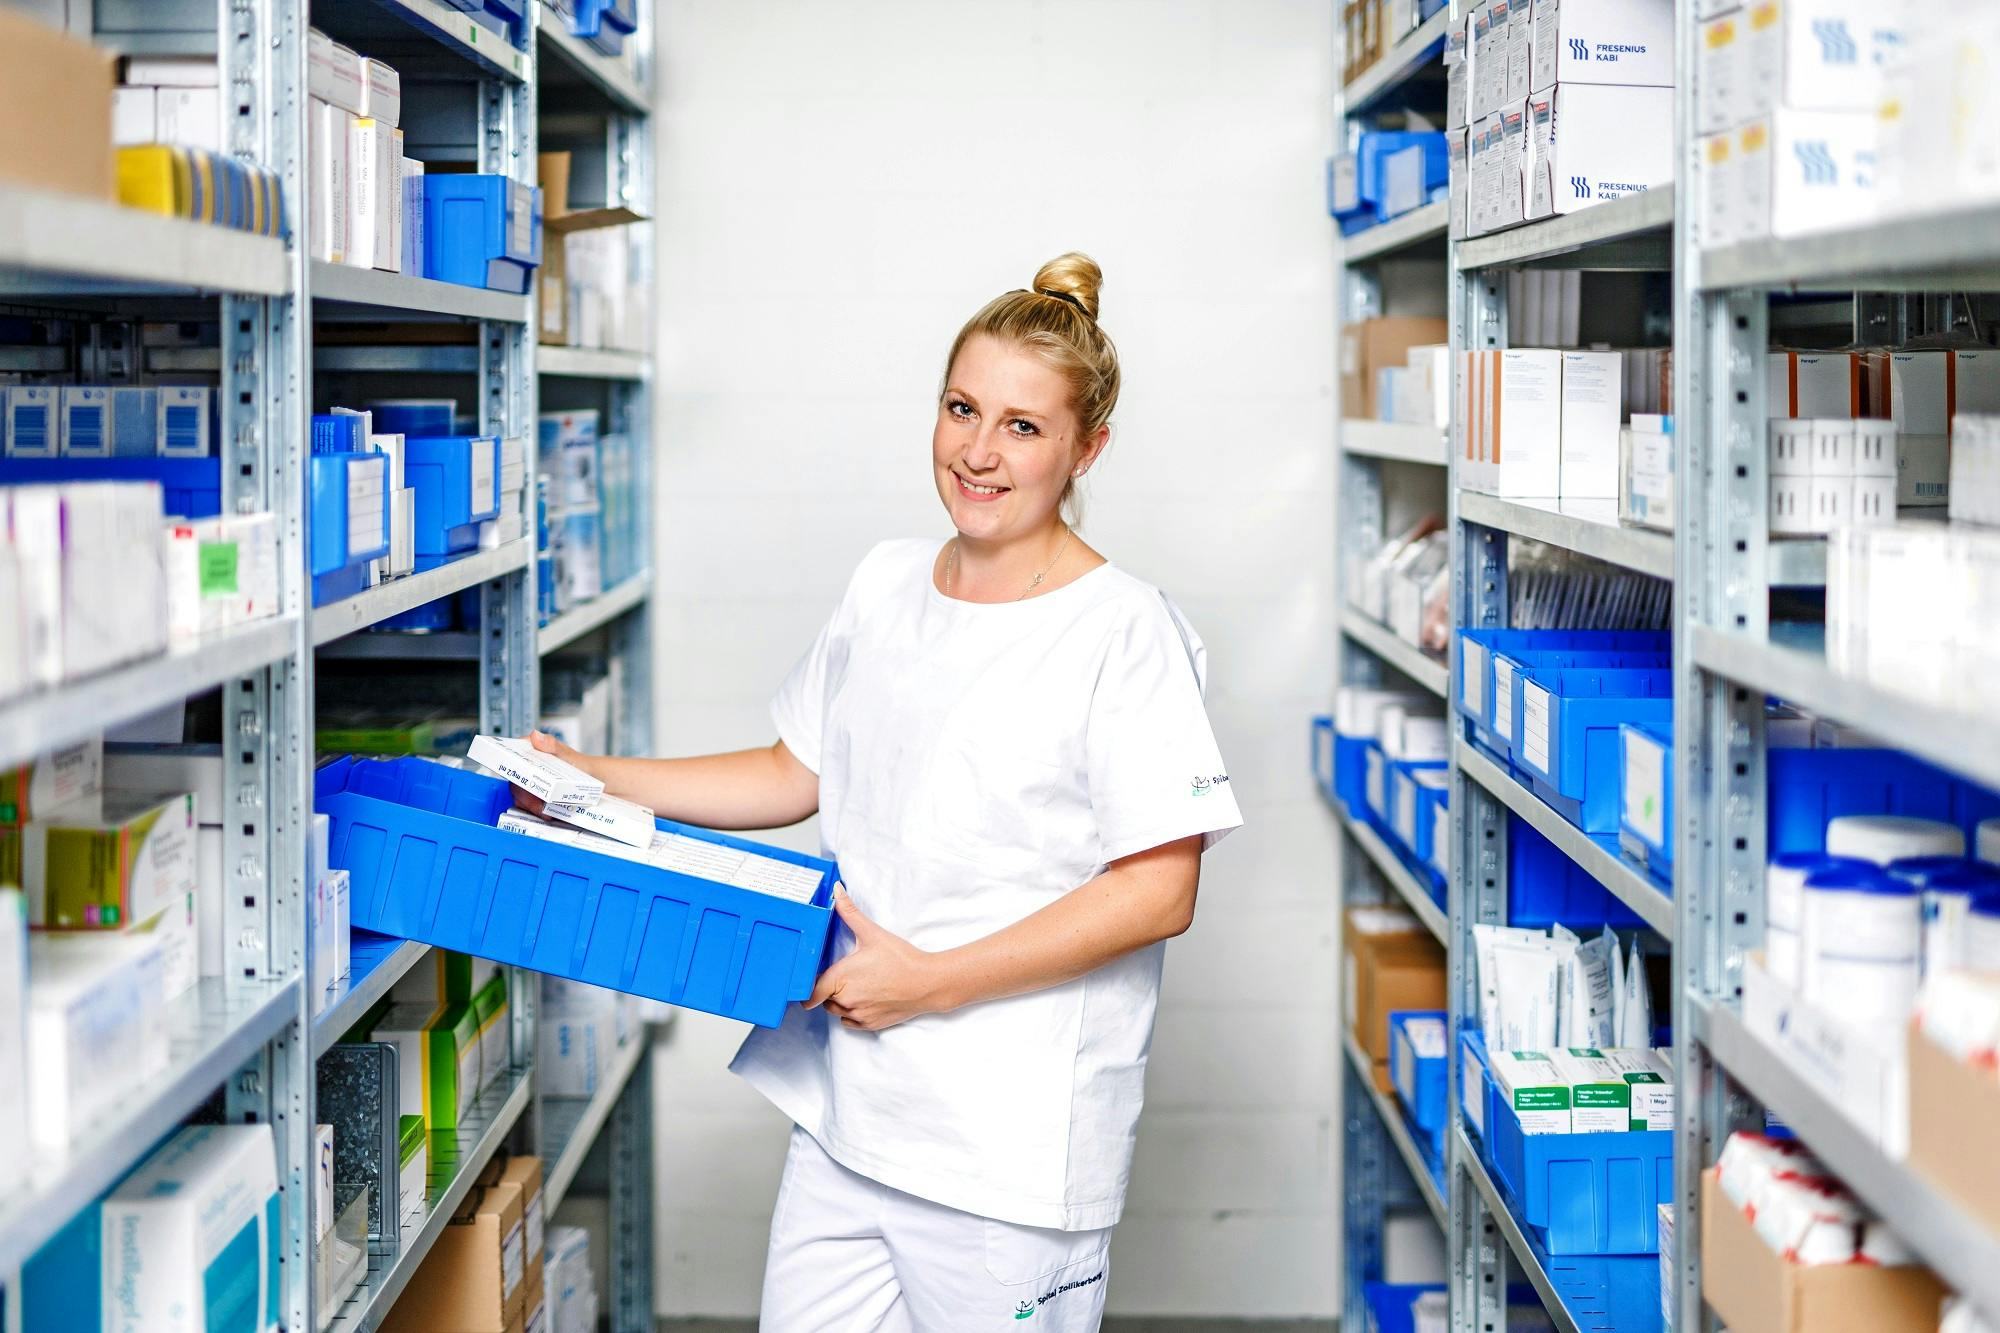 A pharmacist sorts medicines in a warehouse.